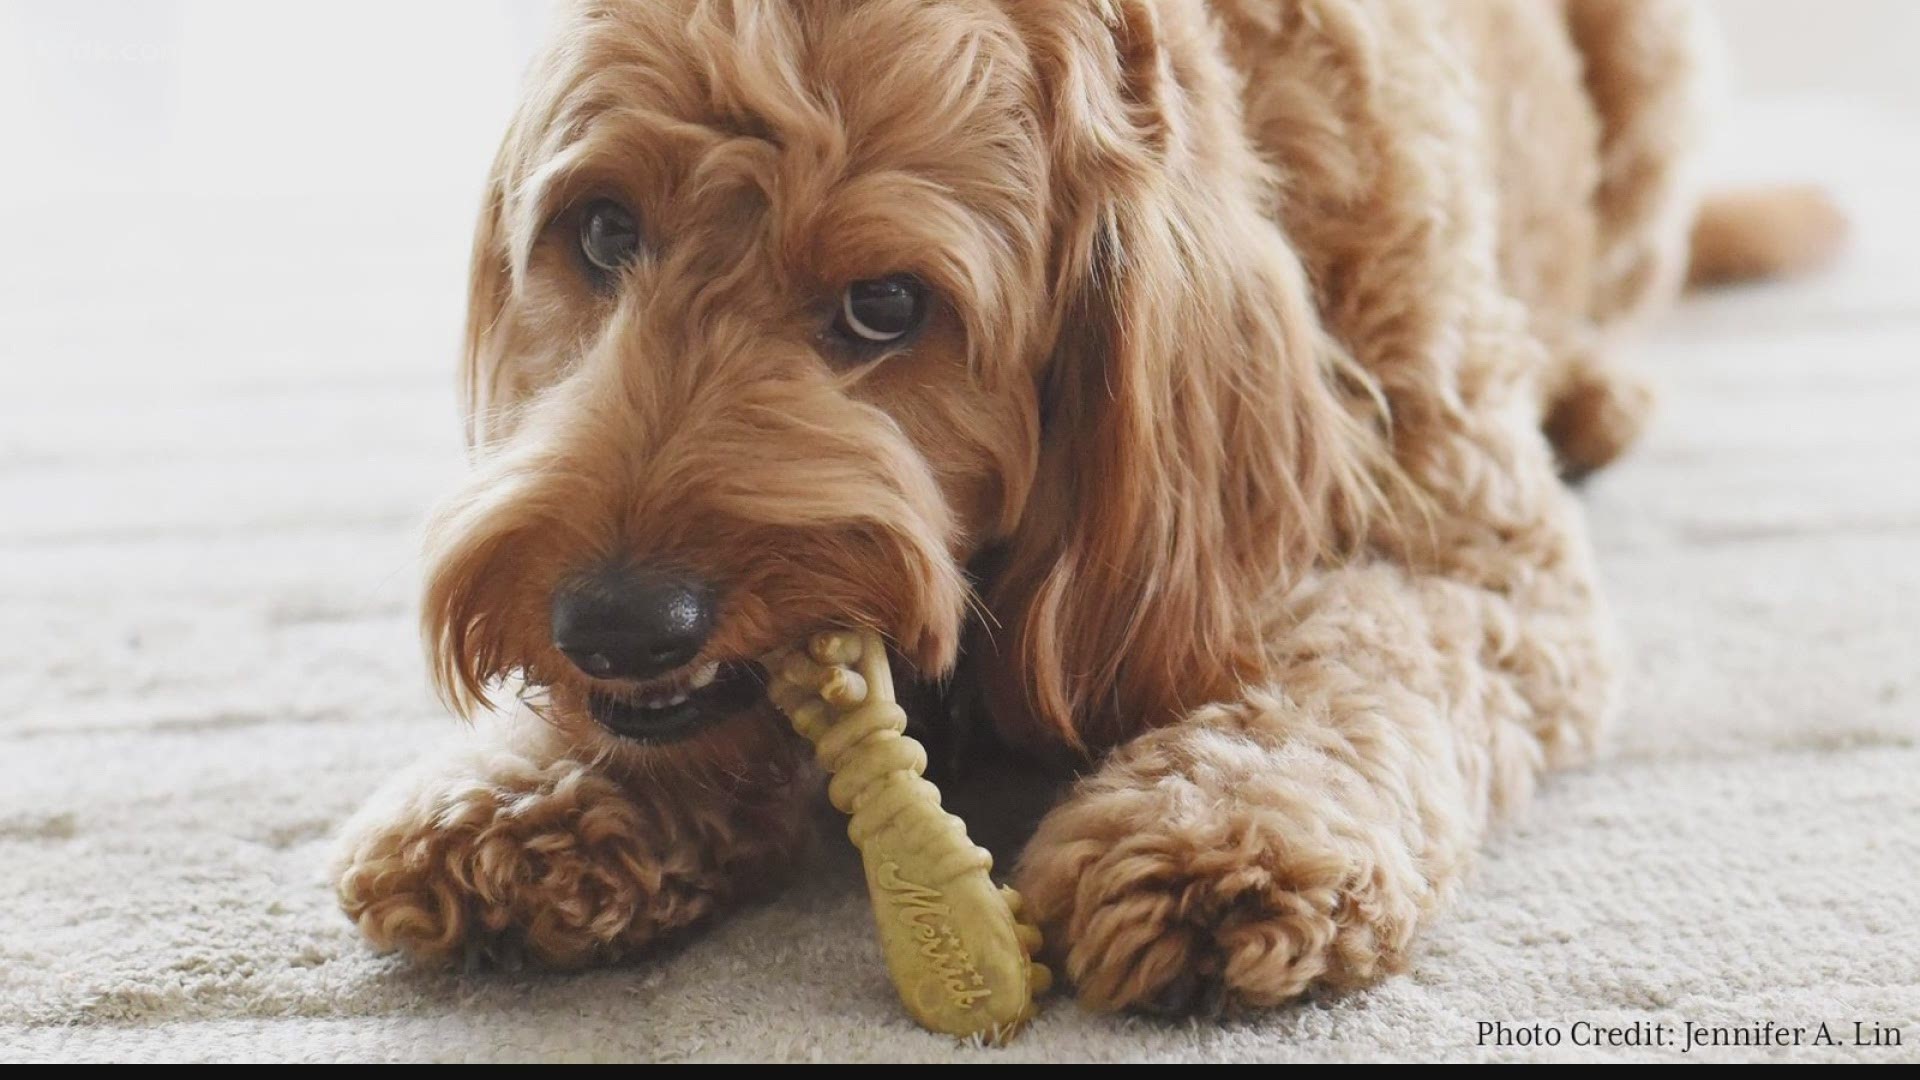 Treats Unleashed can help to keep your pet’s teeth healthy and reduce buildup from treats.